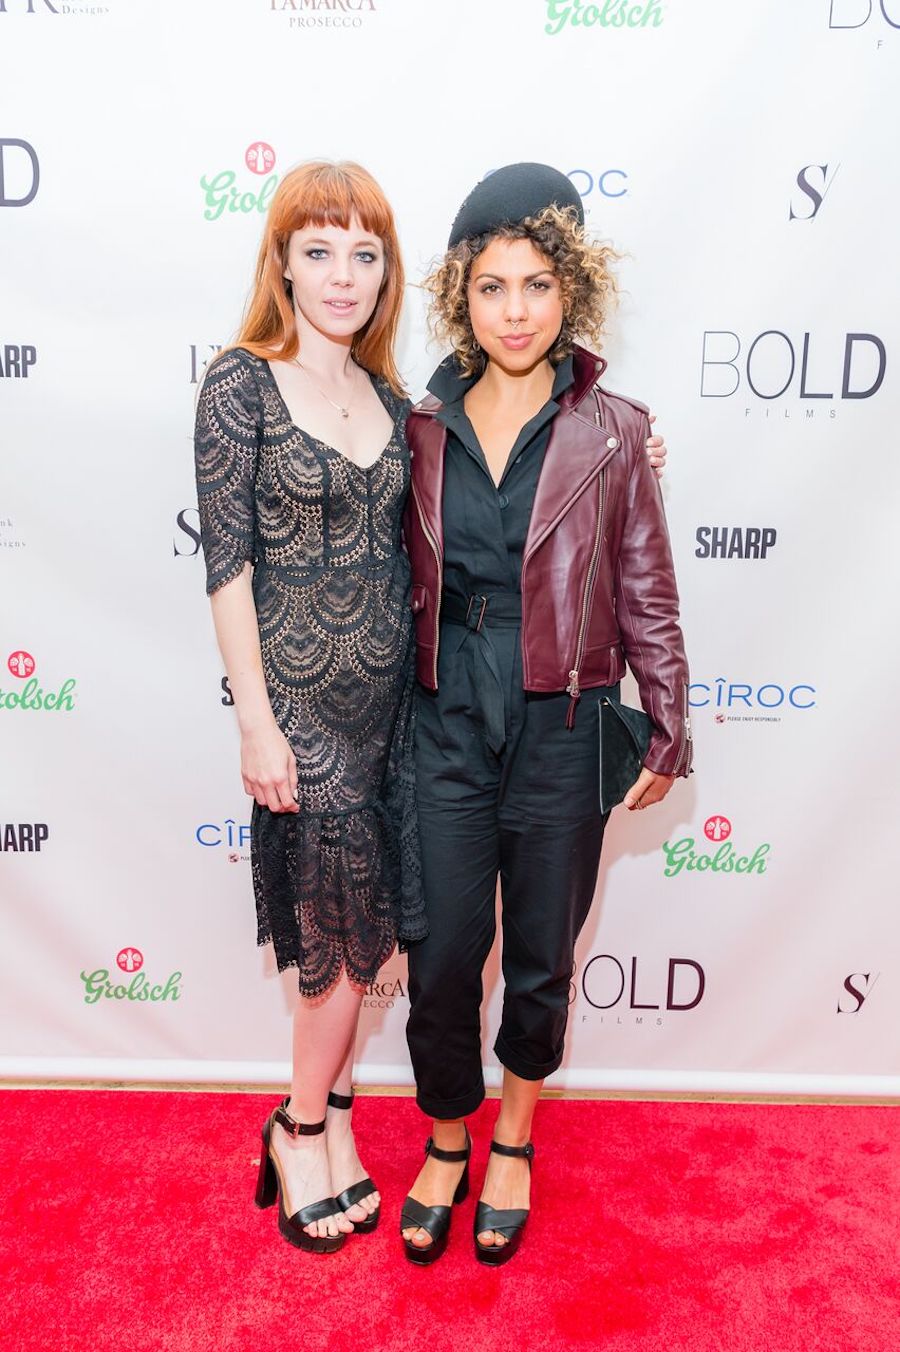 TIFF Rising Stars, left to right, Michaela Kurimsky and Jess Salgueiro attend the TIFF kick-off party hosted by Sharp and S/ Magazines at the House of Aurora (Photo: Photagonist.ca for Bold Films) | Vie the VIBE